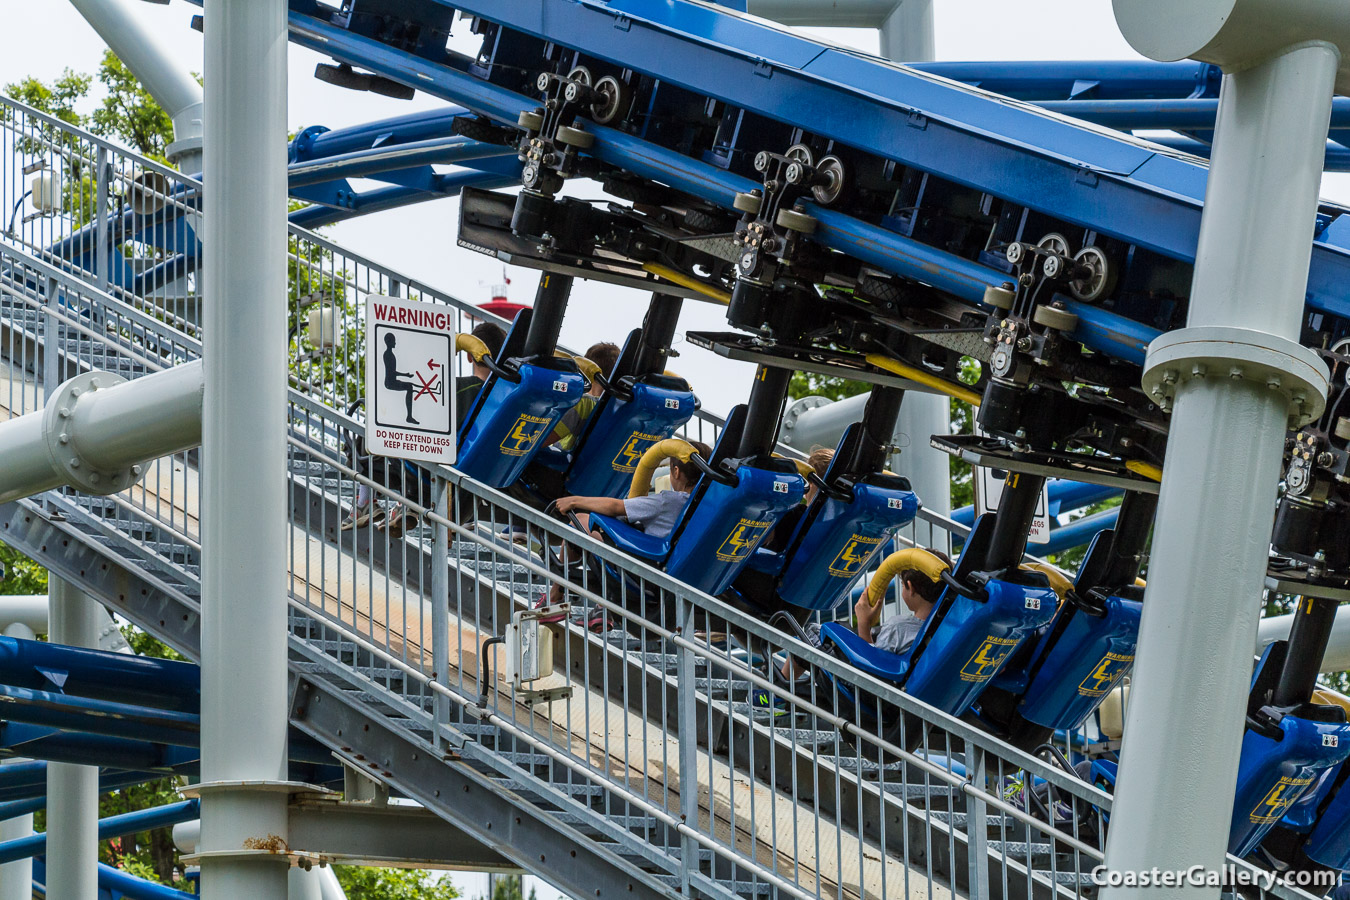 Warning signs to prevent injuries on inverted roller coasters